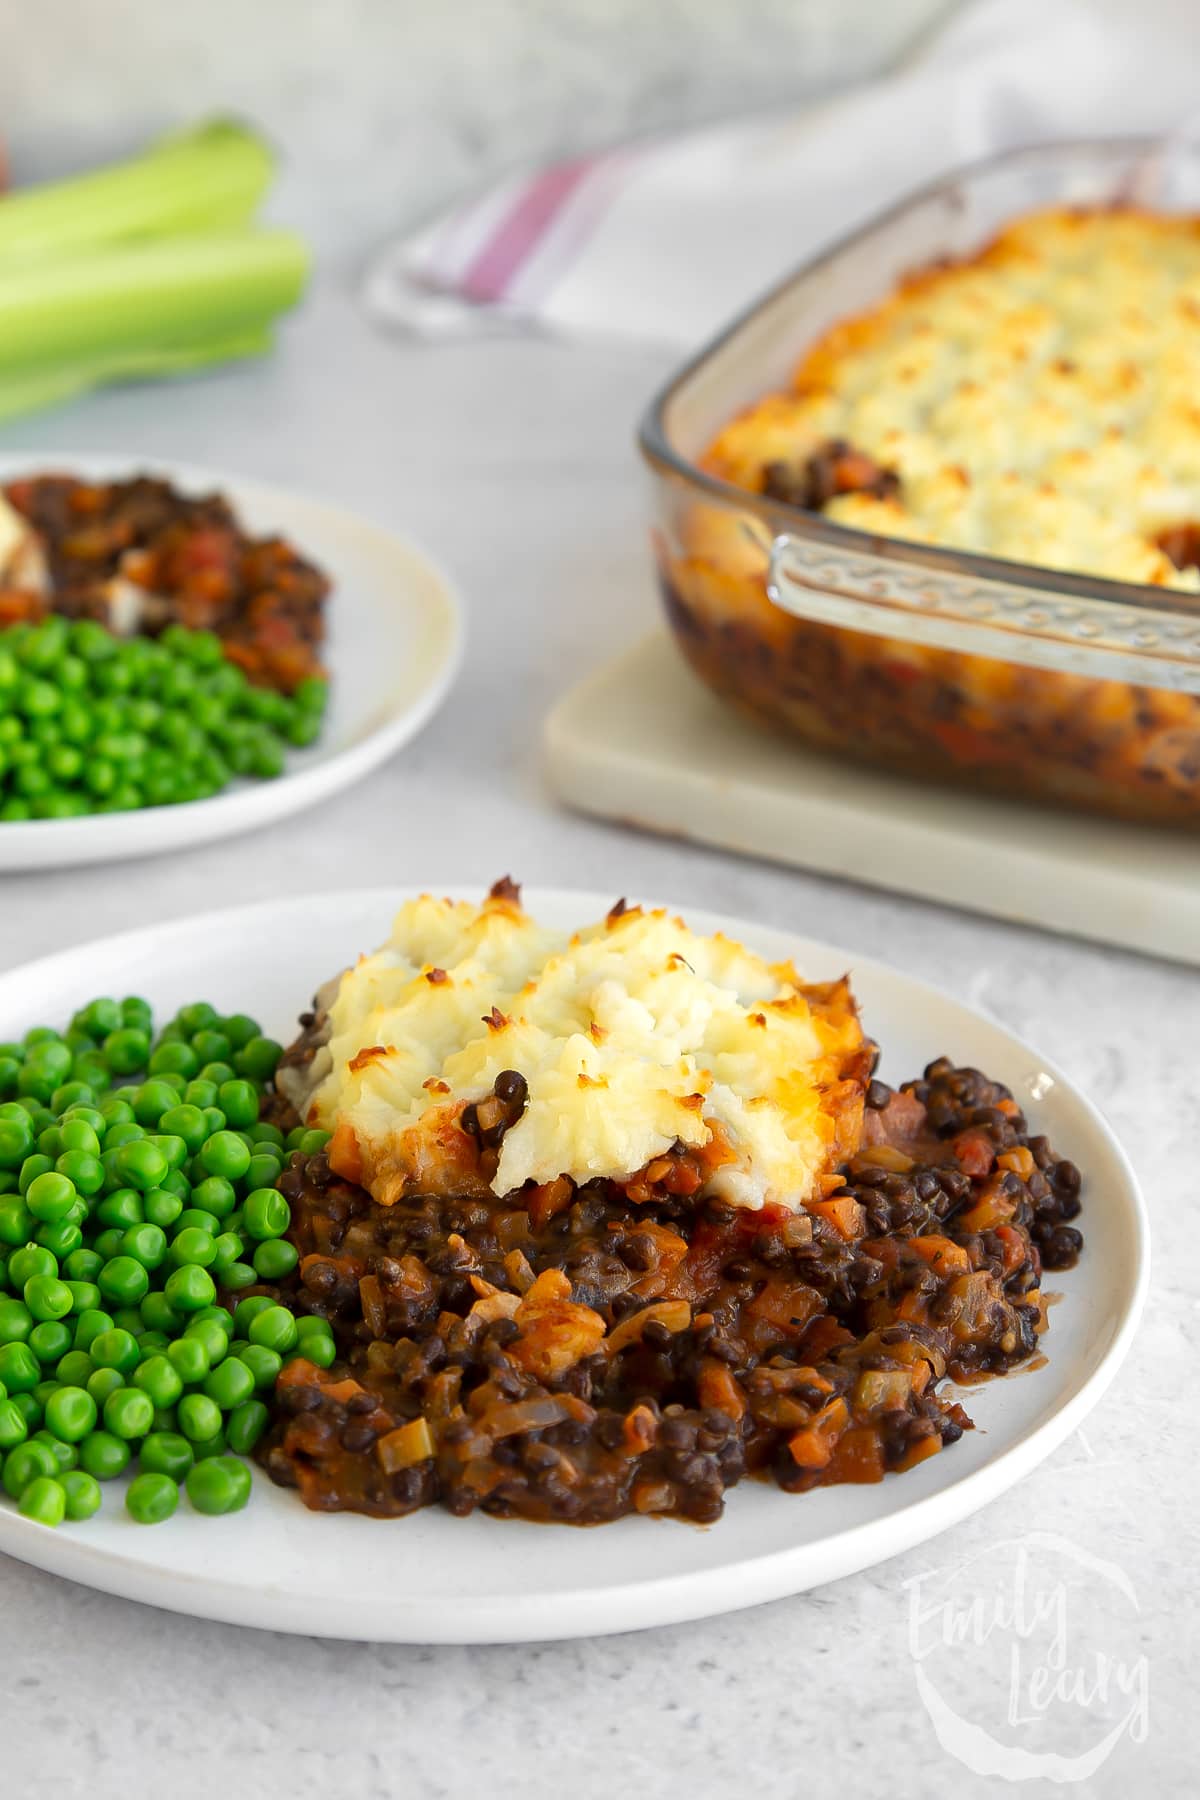 A piece of Vegetarian shepherd's pie on a white plate with peas.